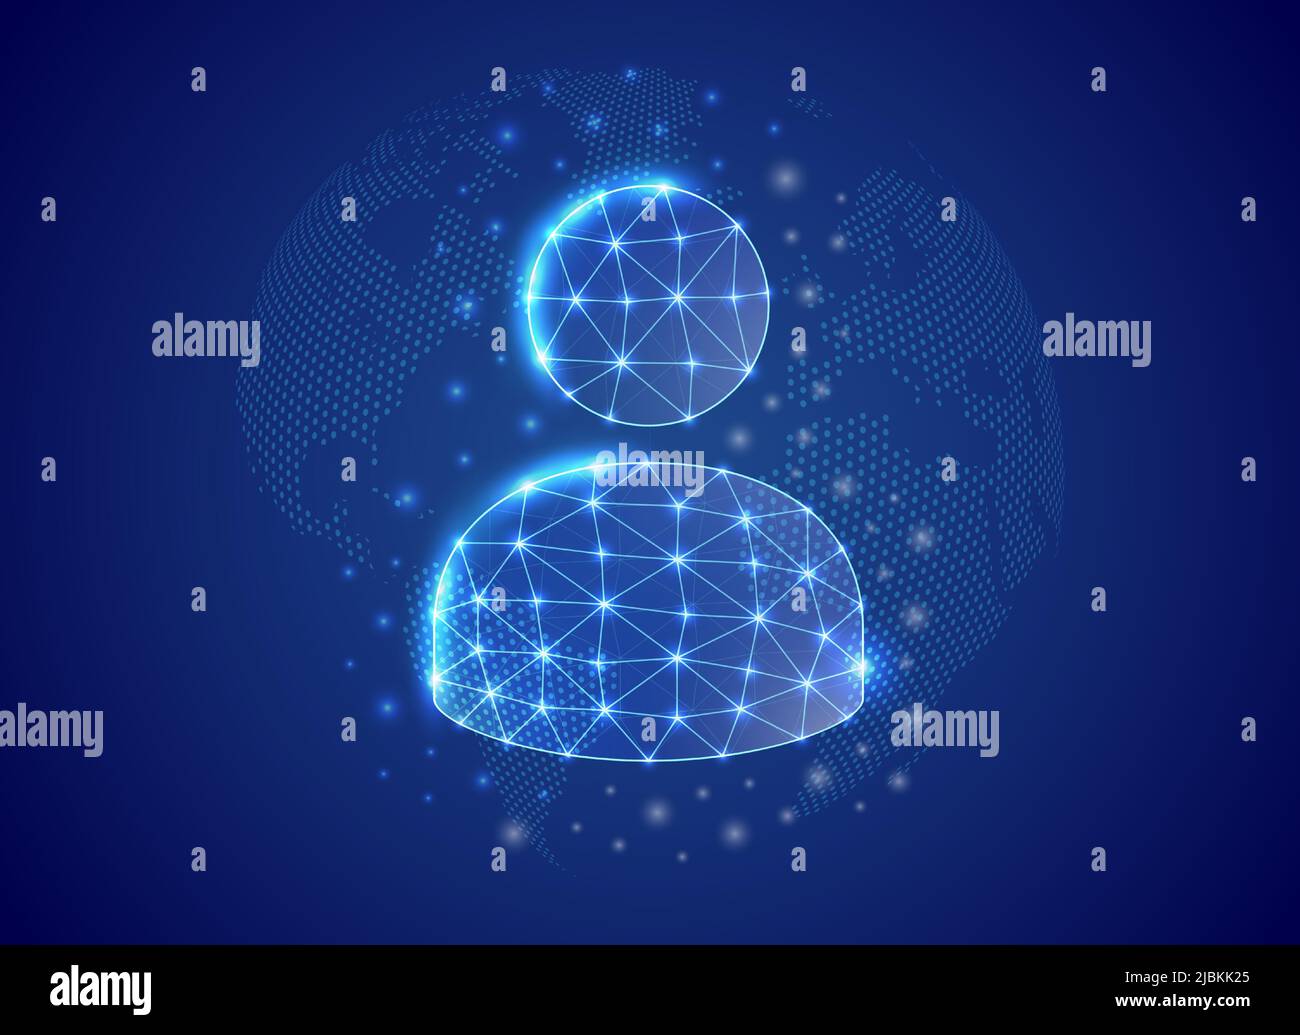 User avatar 3d low poly symbol with blue world map background. Teamwork concept design illustration. Profile polygonal symbol with connected dots Stock Vector